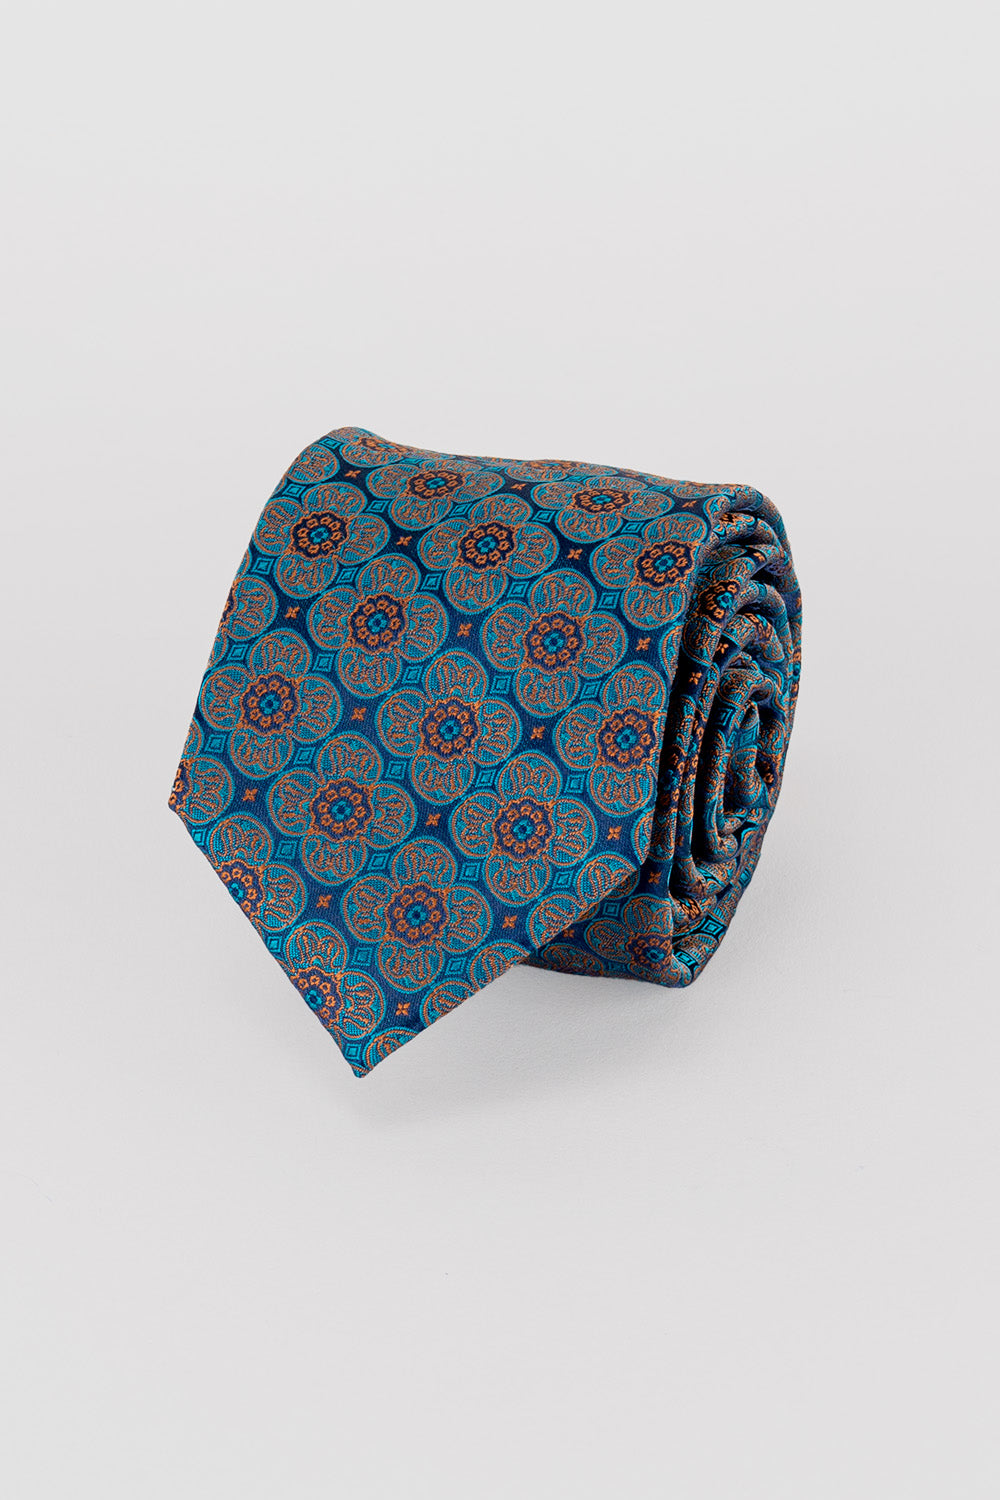 Elliot Turquoise Floral Mens Tie Oswin Hyde